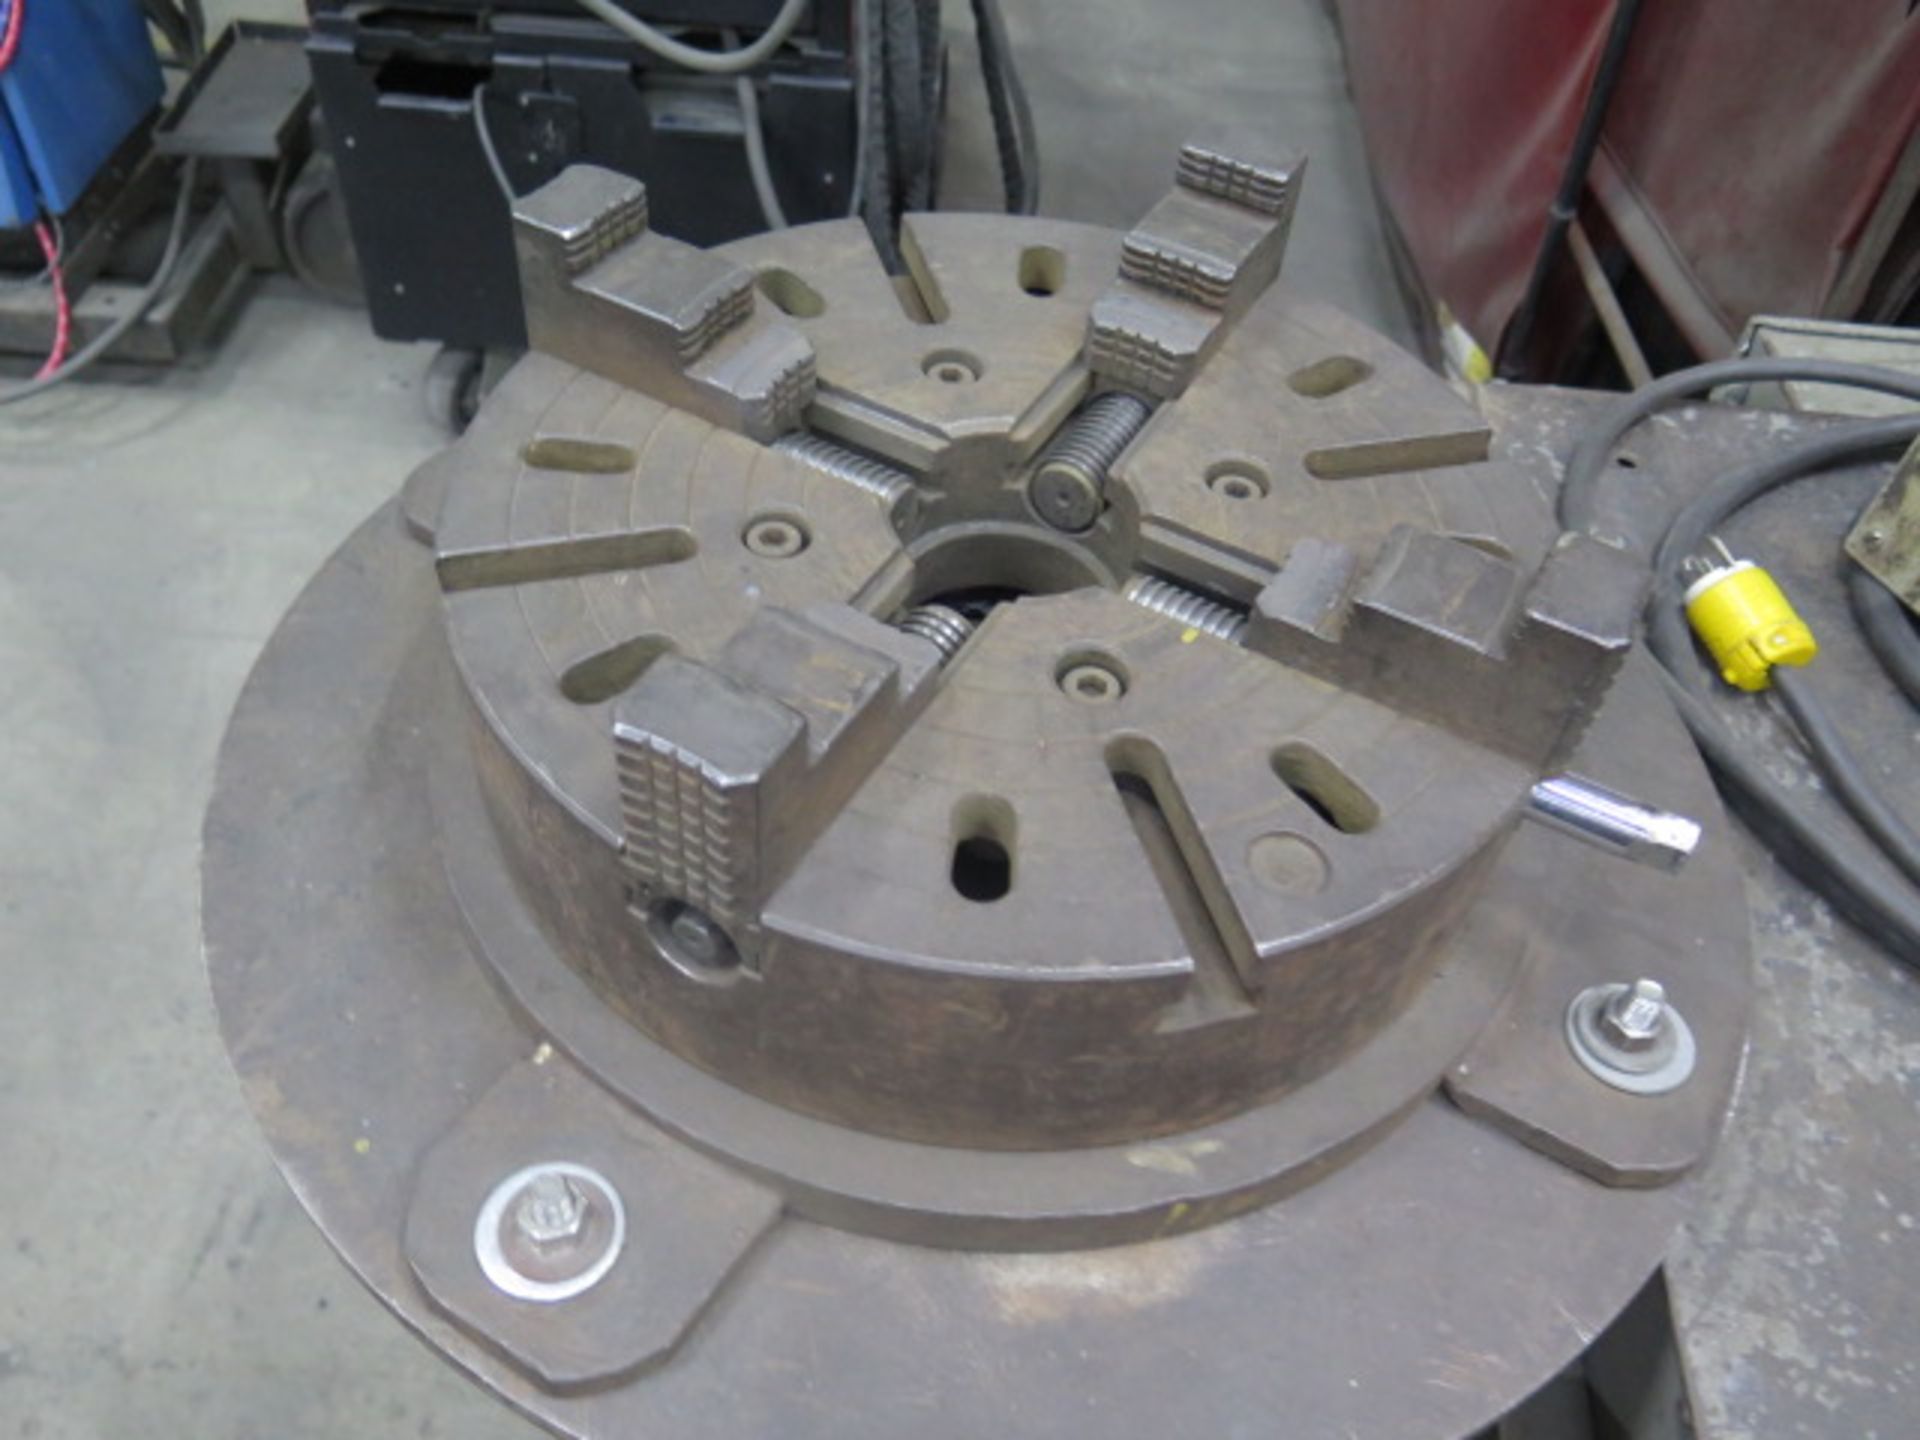 Koike Aronson 24” Welding Positioner s/n 011500 w/ 15” 4-Jaw Chuck (SOLD AS-IS - NO WARRANTY) - Image 5 of 7